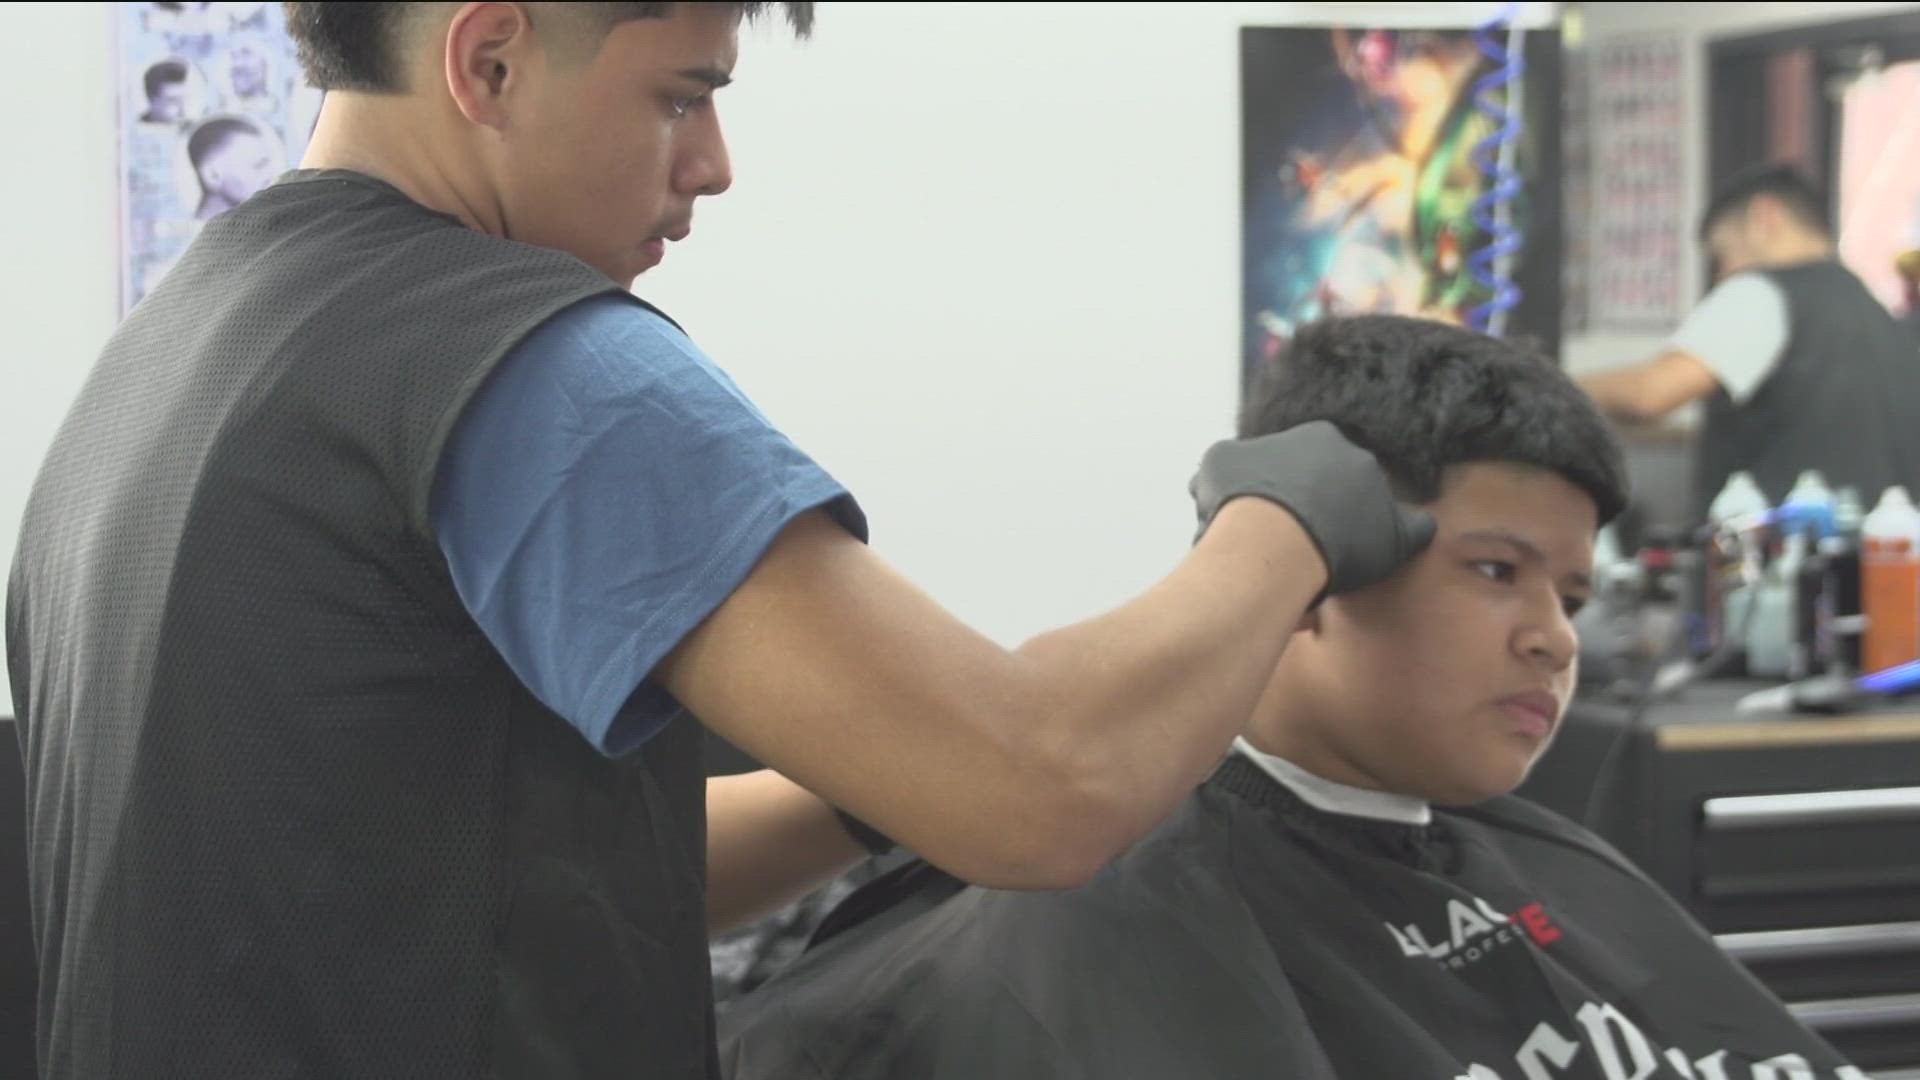 Hundreds of clients have sat in Tony Medina's chair since he started cutting hair at 13.